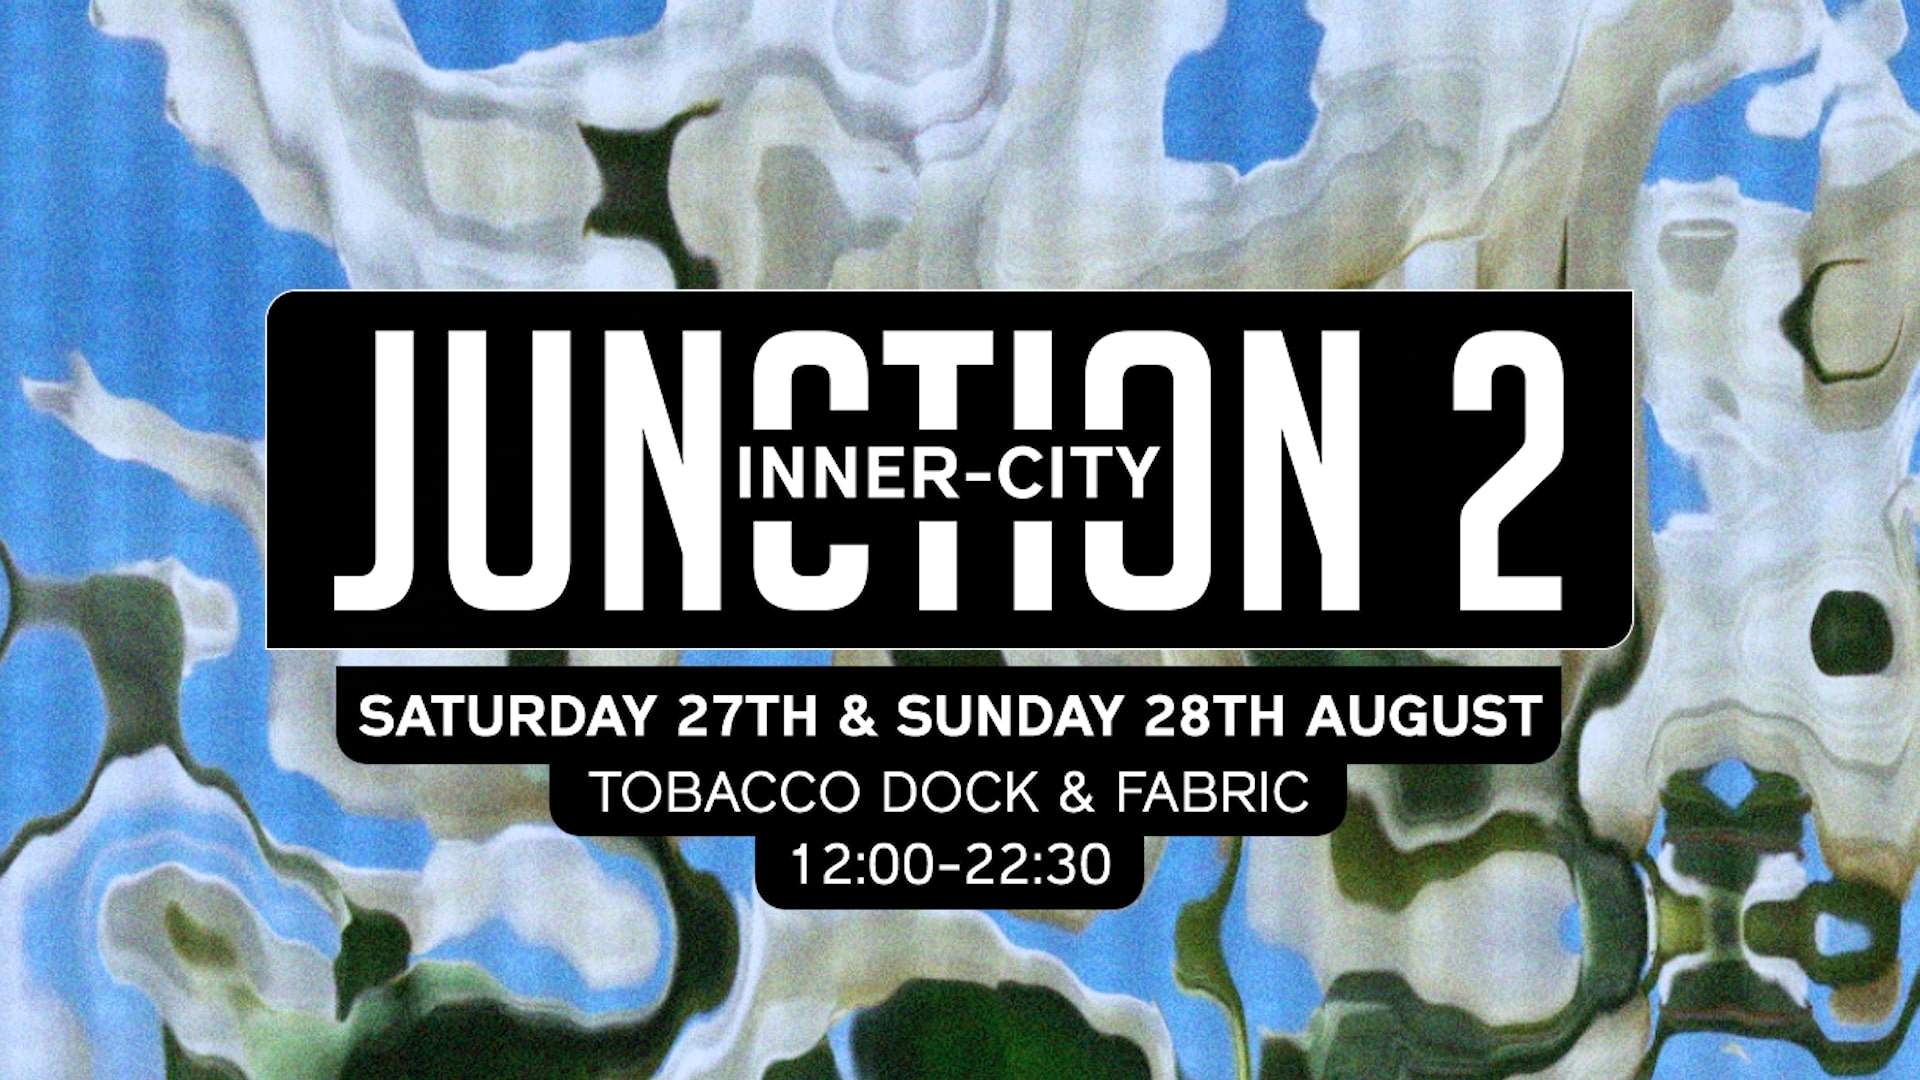 Junction 2 - Inner City: By Day (Sunday) - Página frontal